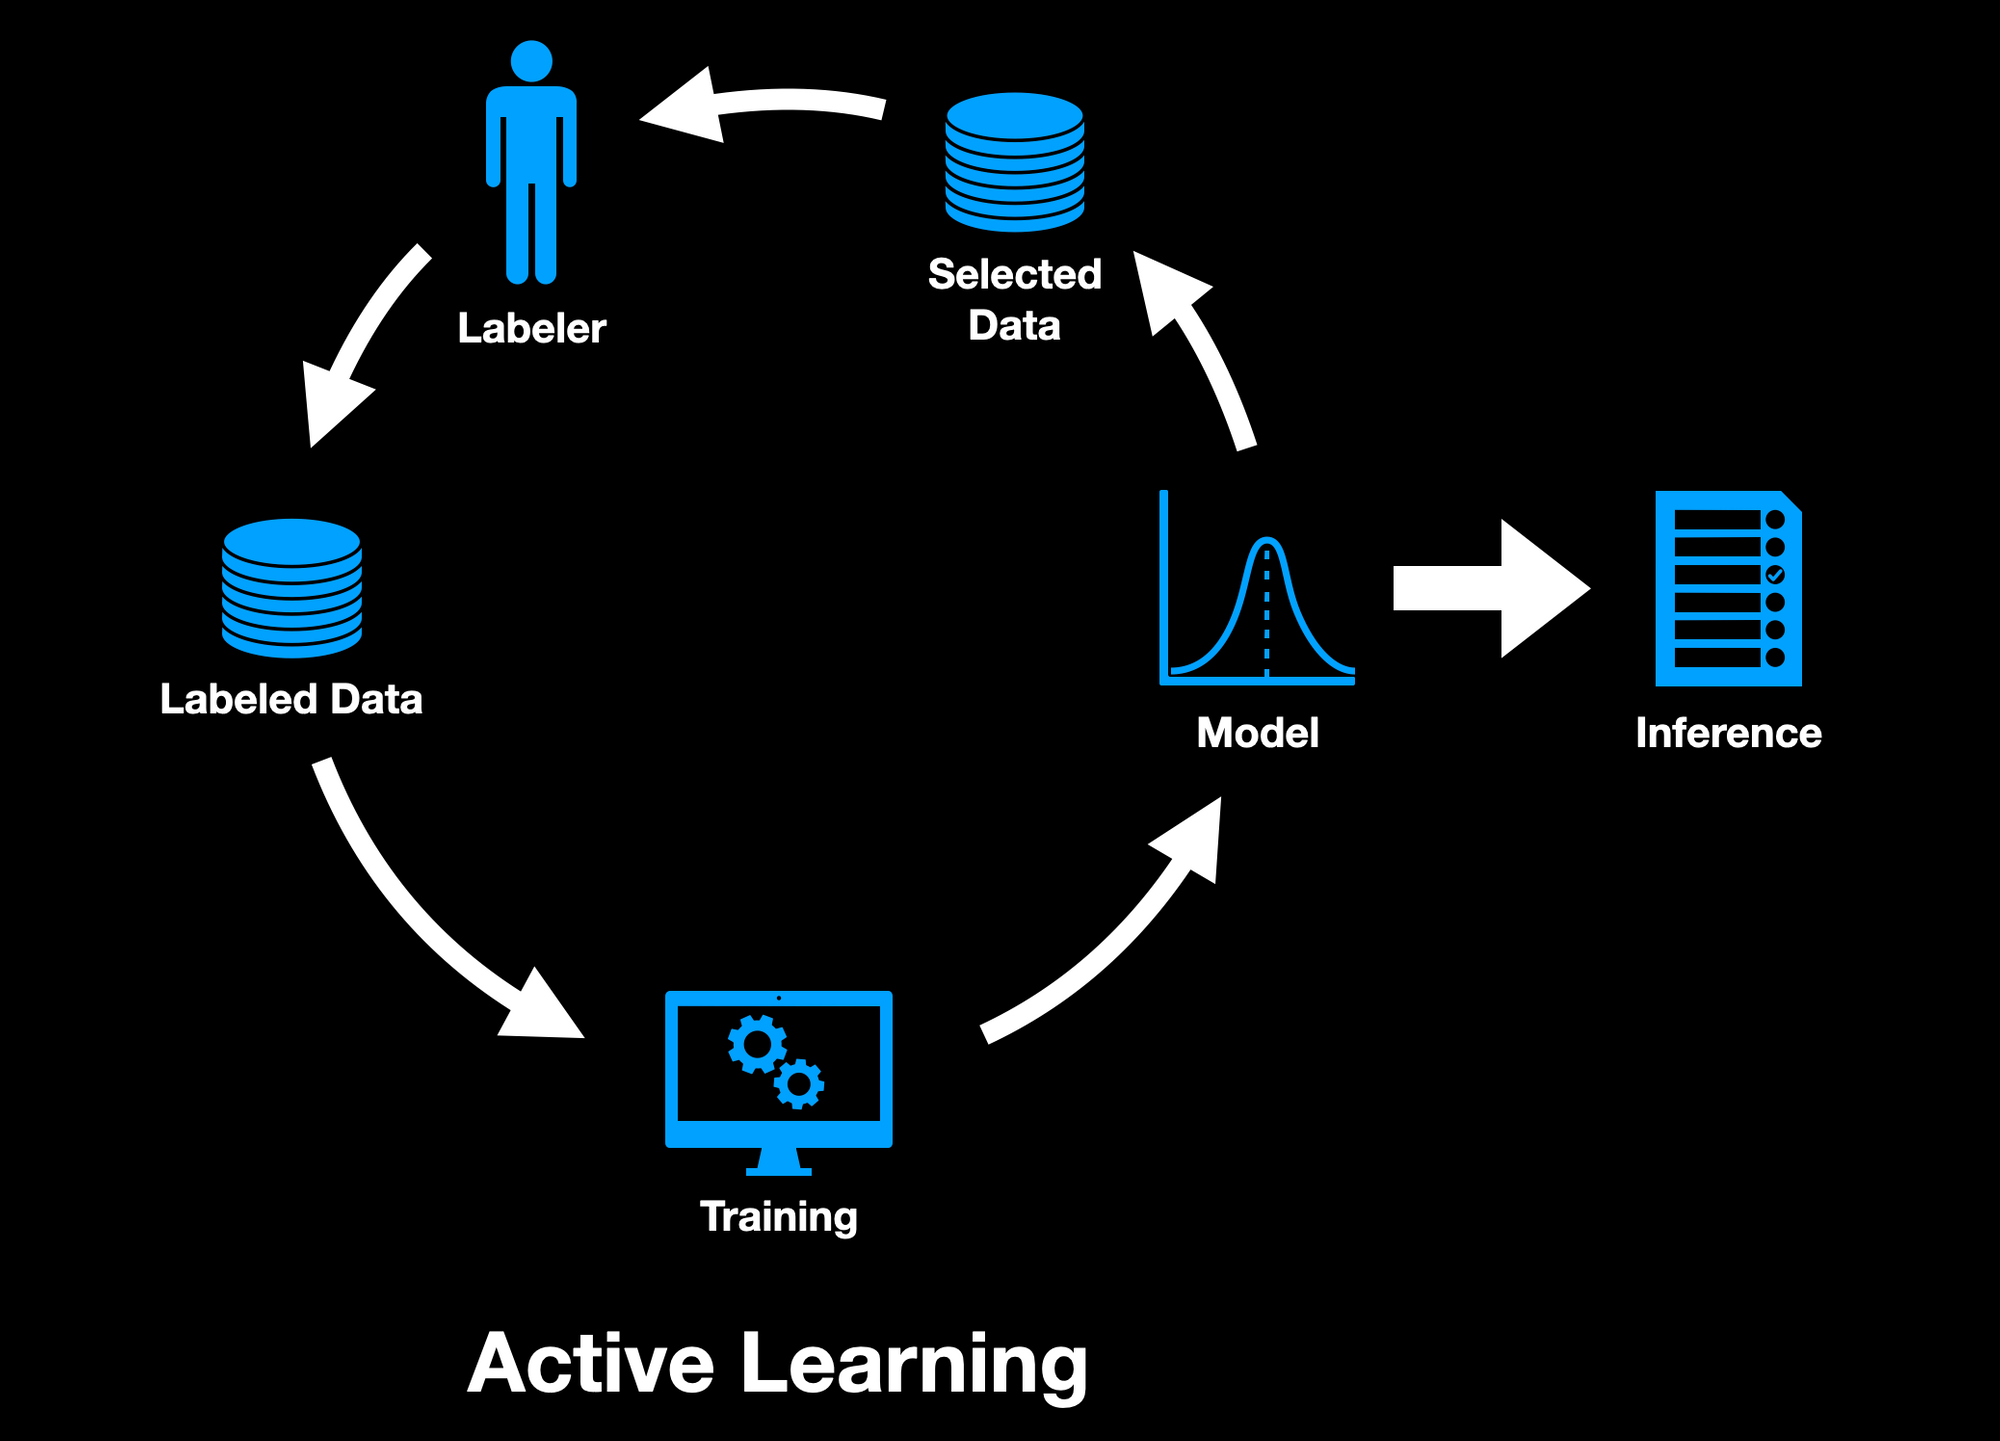 A flow diagram describing active learning. There is a circle of steps going counter clockwise starting at the left with labeled data to training to model to selected data to labeler. Additionally, there's an step leaving the circle from model to inference.